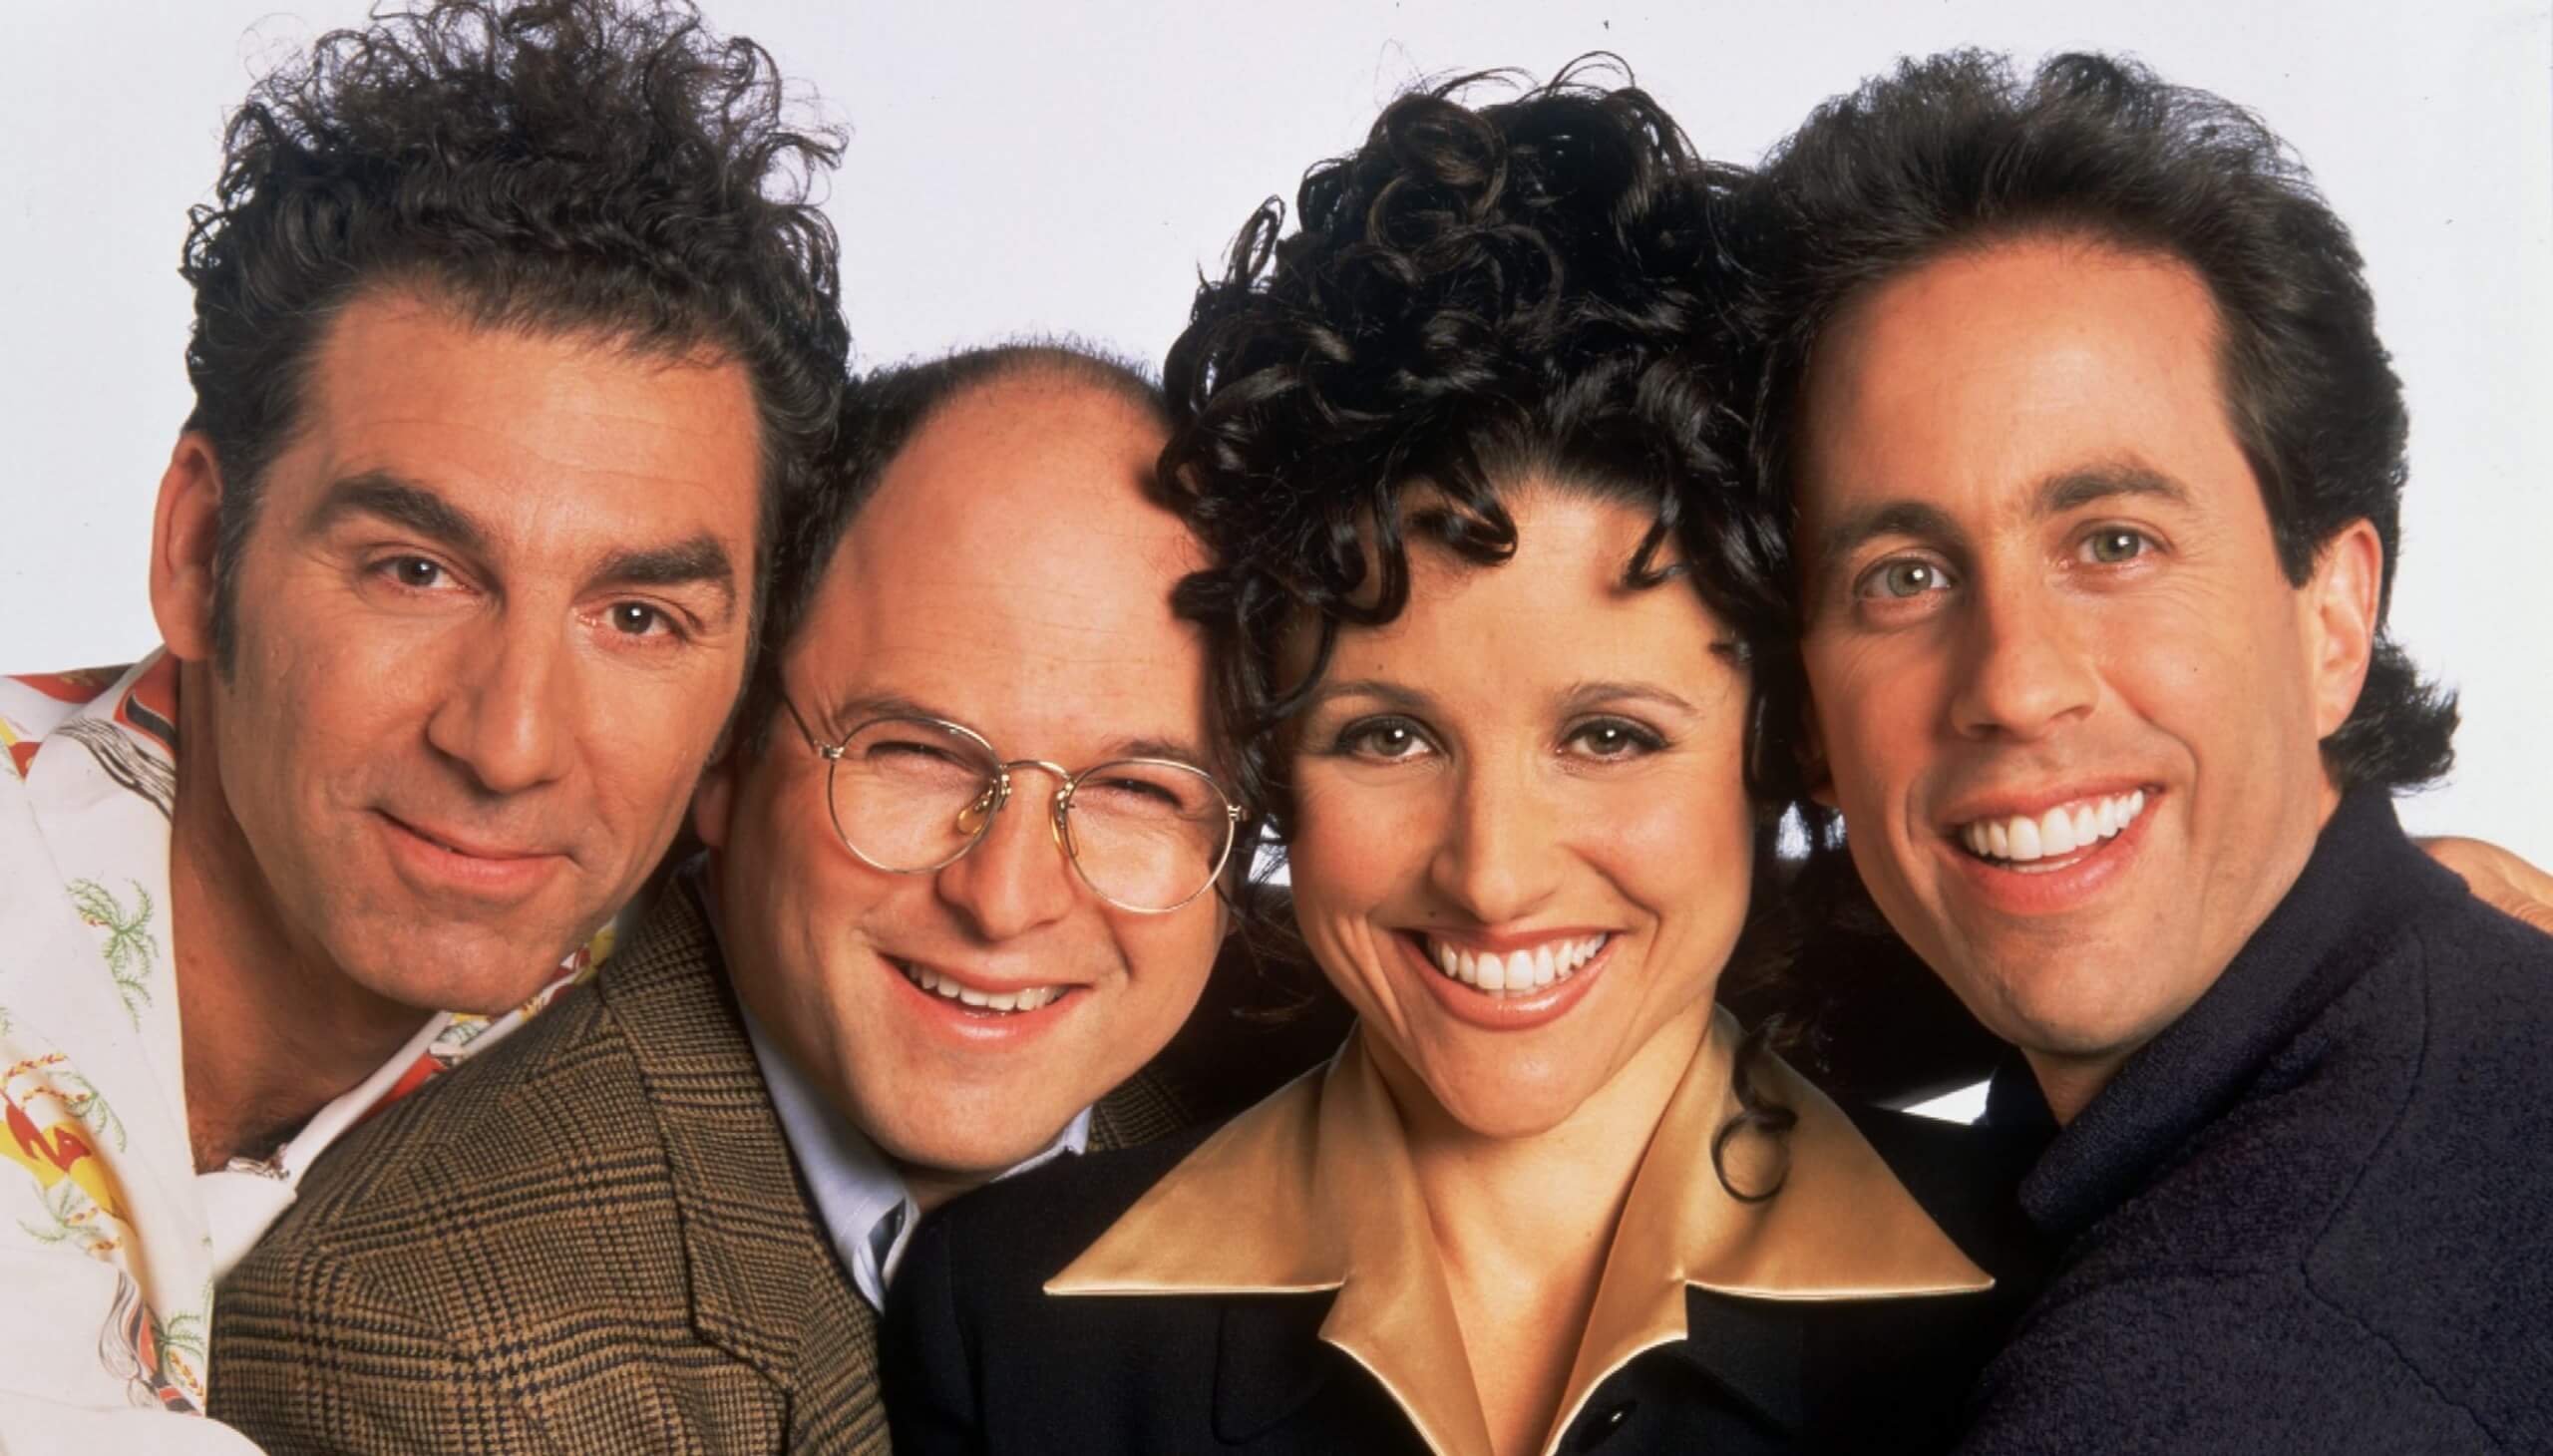 Netflix grabs Seinfeld rights in $500 million+ deal, will stream show in 4K